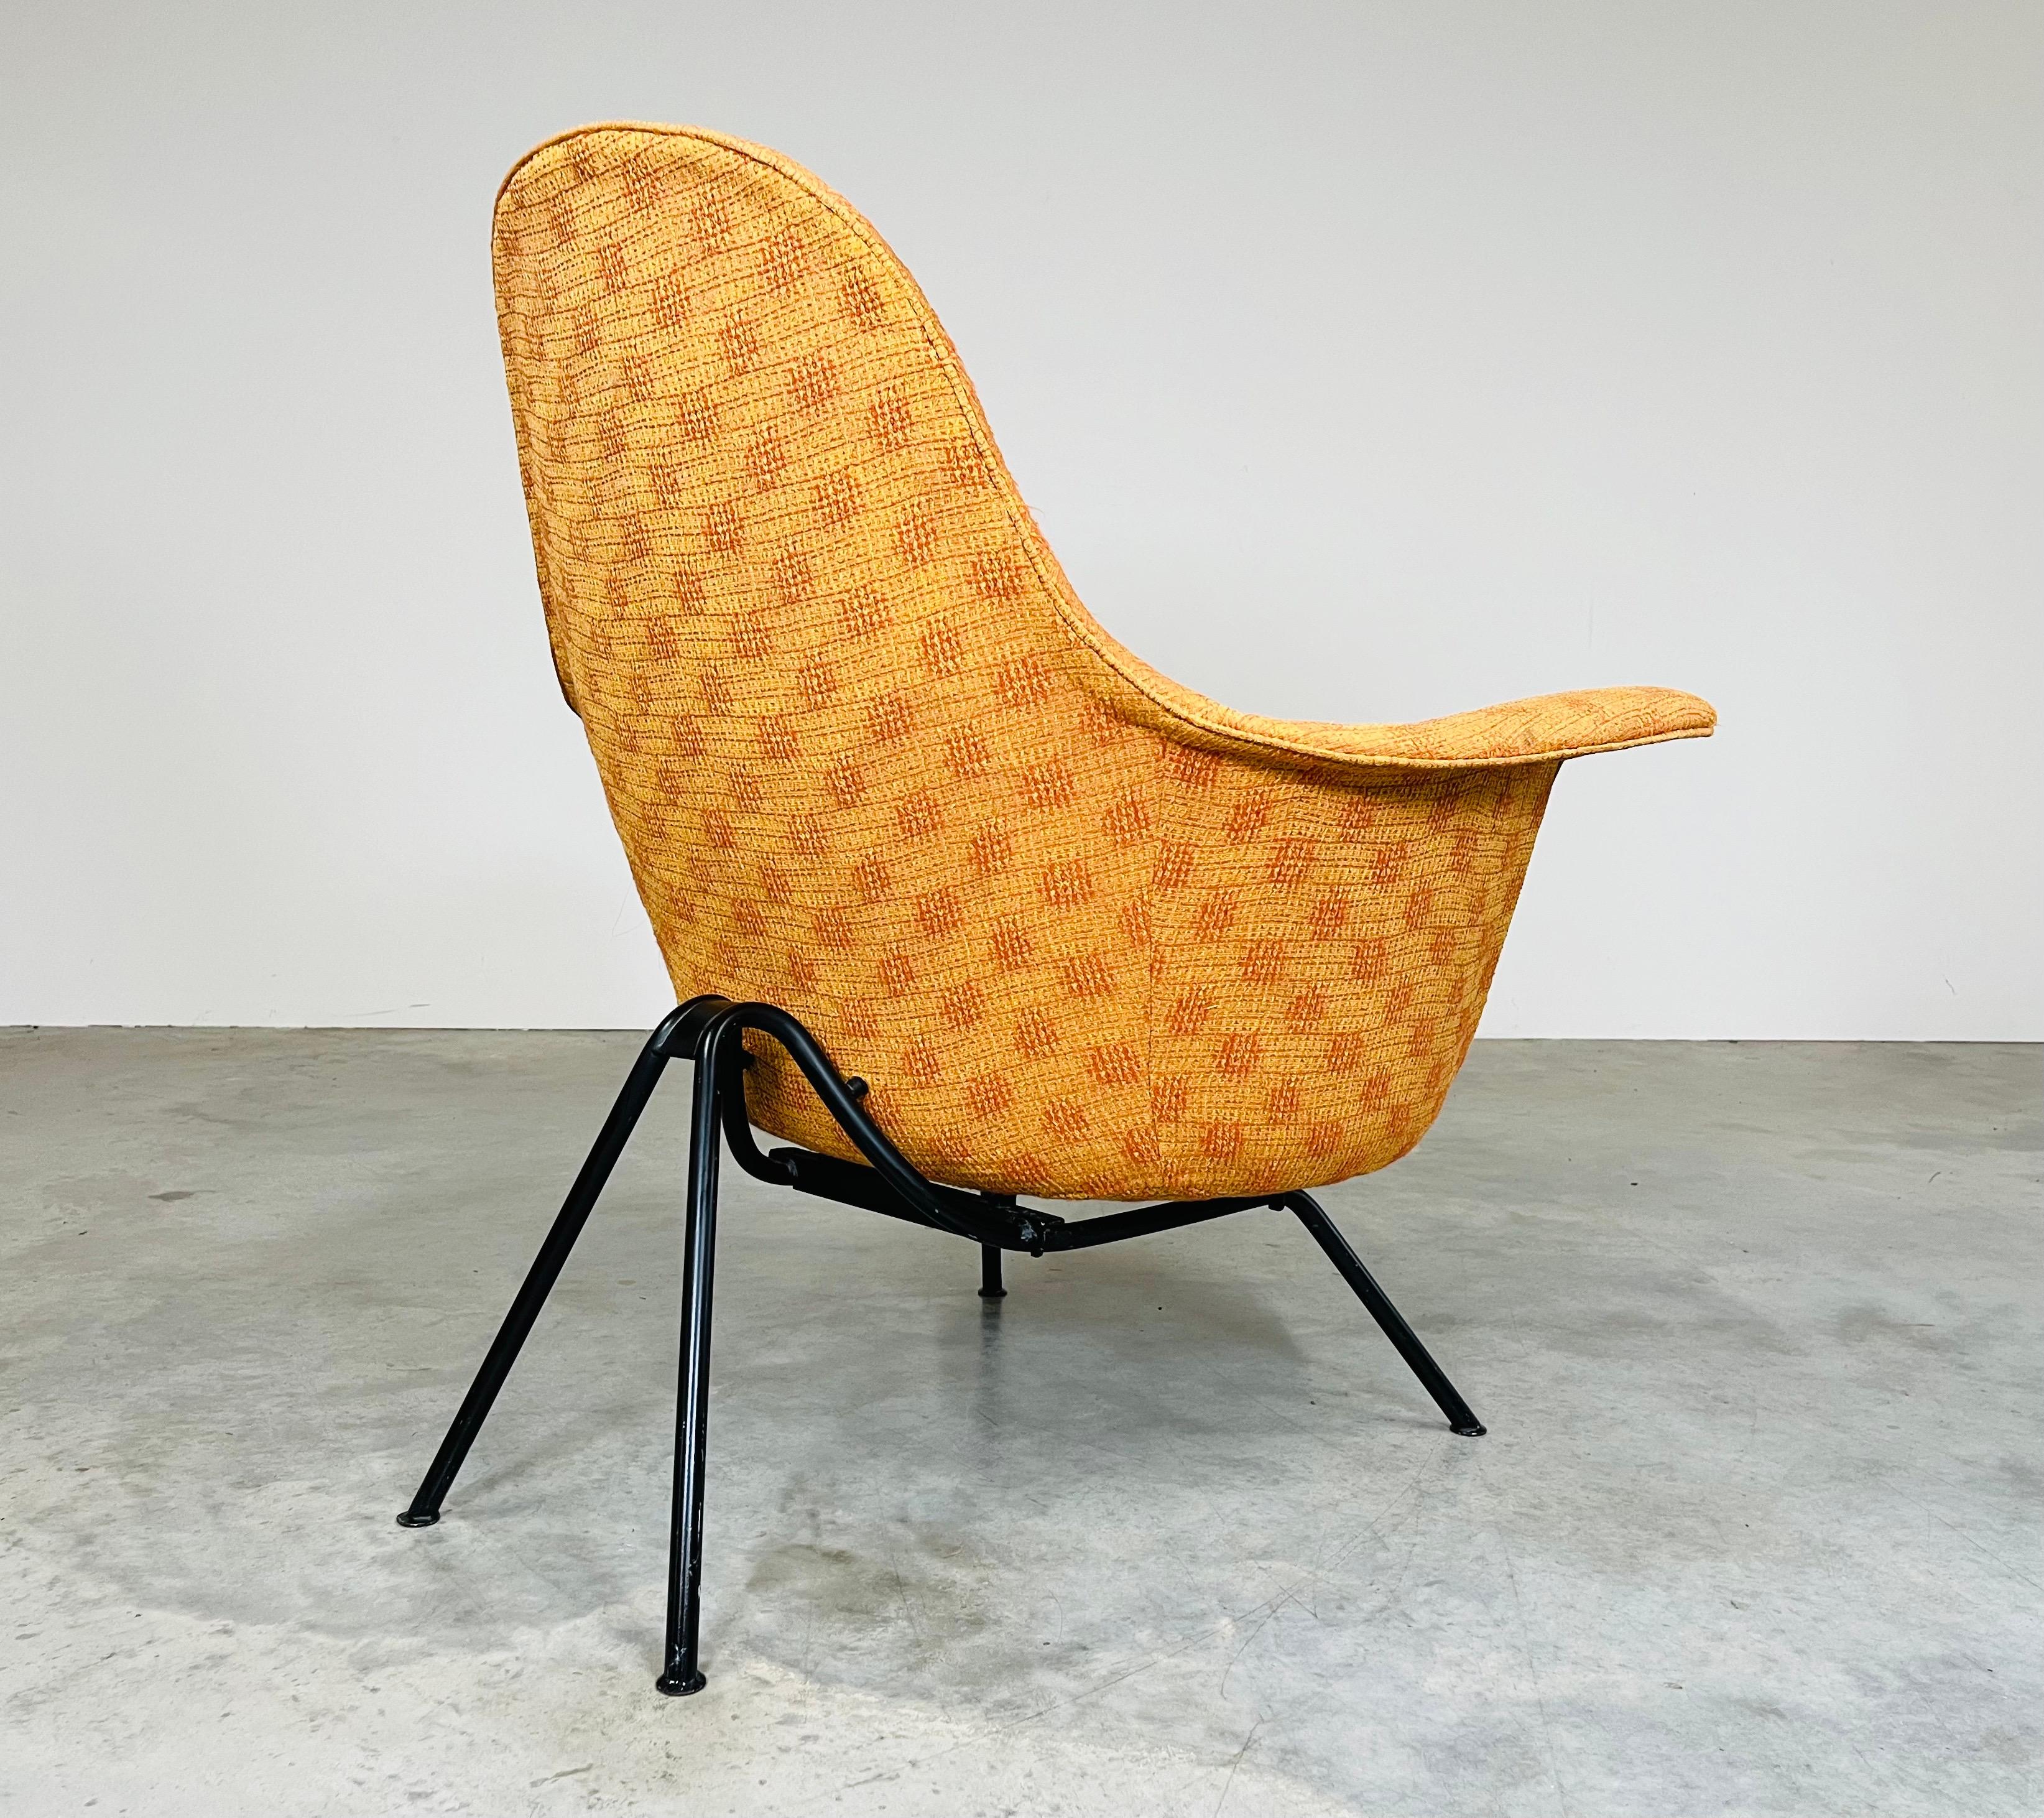 20th Century Easy Lounge Chair By Hans Bellmann From His Sitwell Collection Switzerland -1955 For Sale